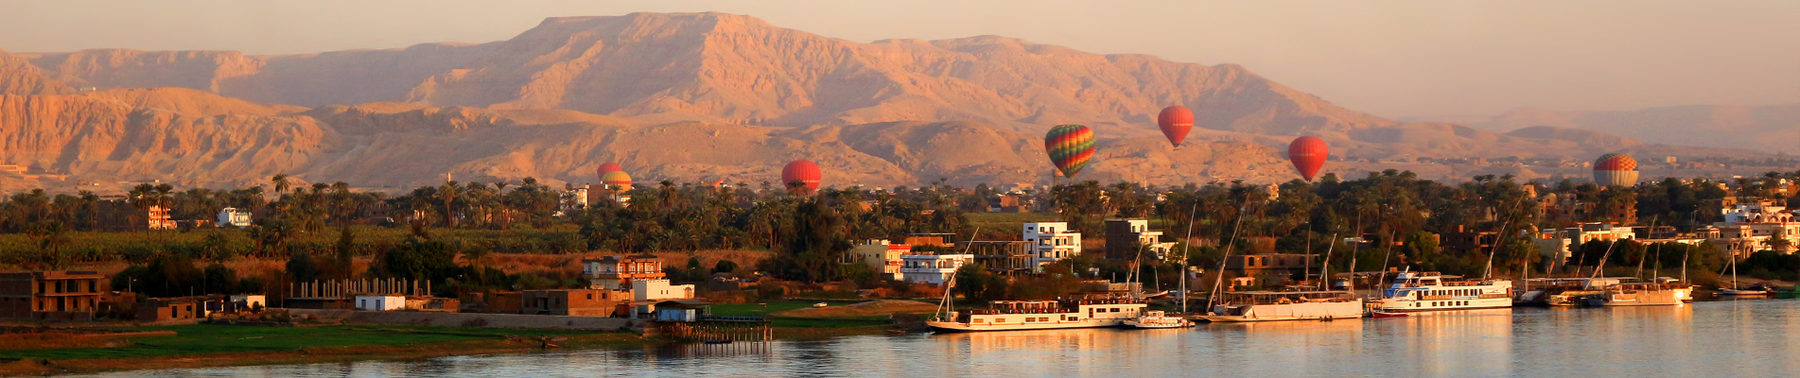 Hot Air Balloons in Egypt